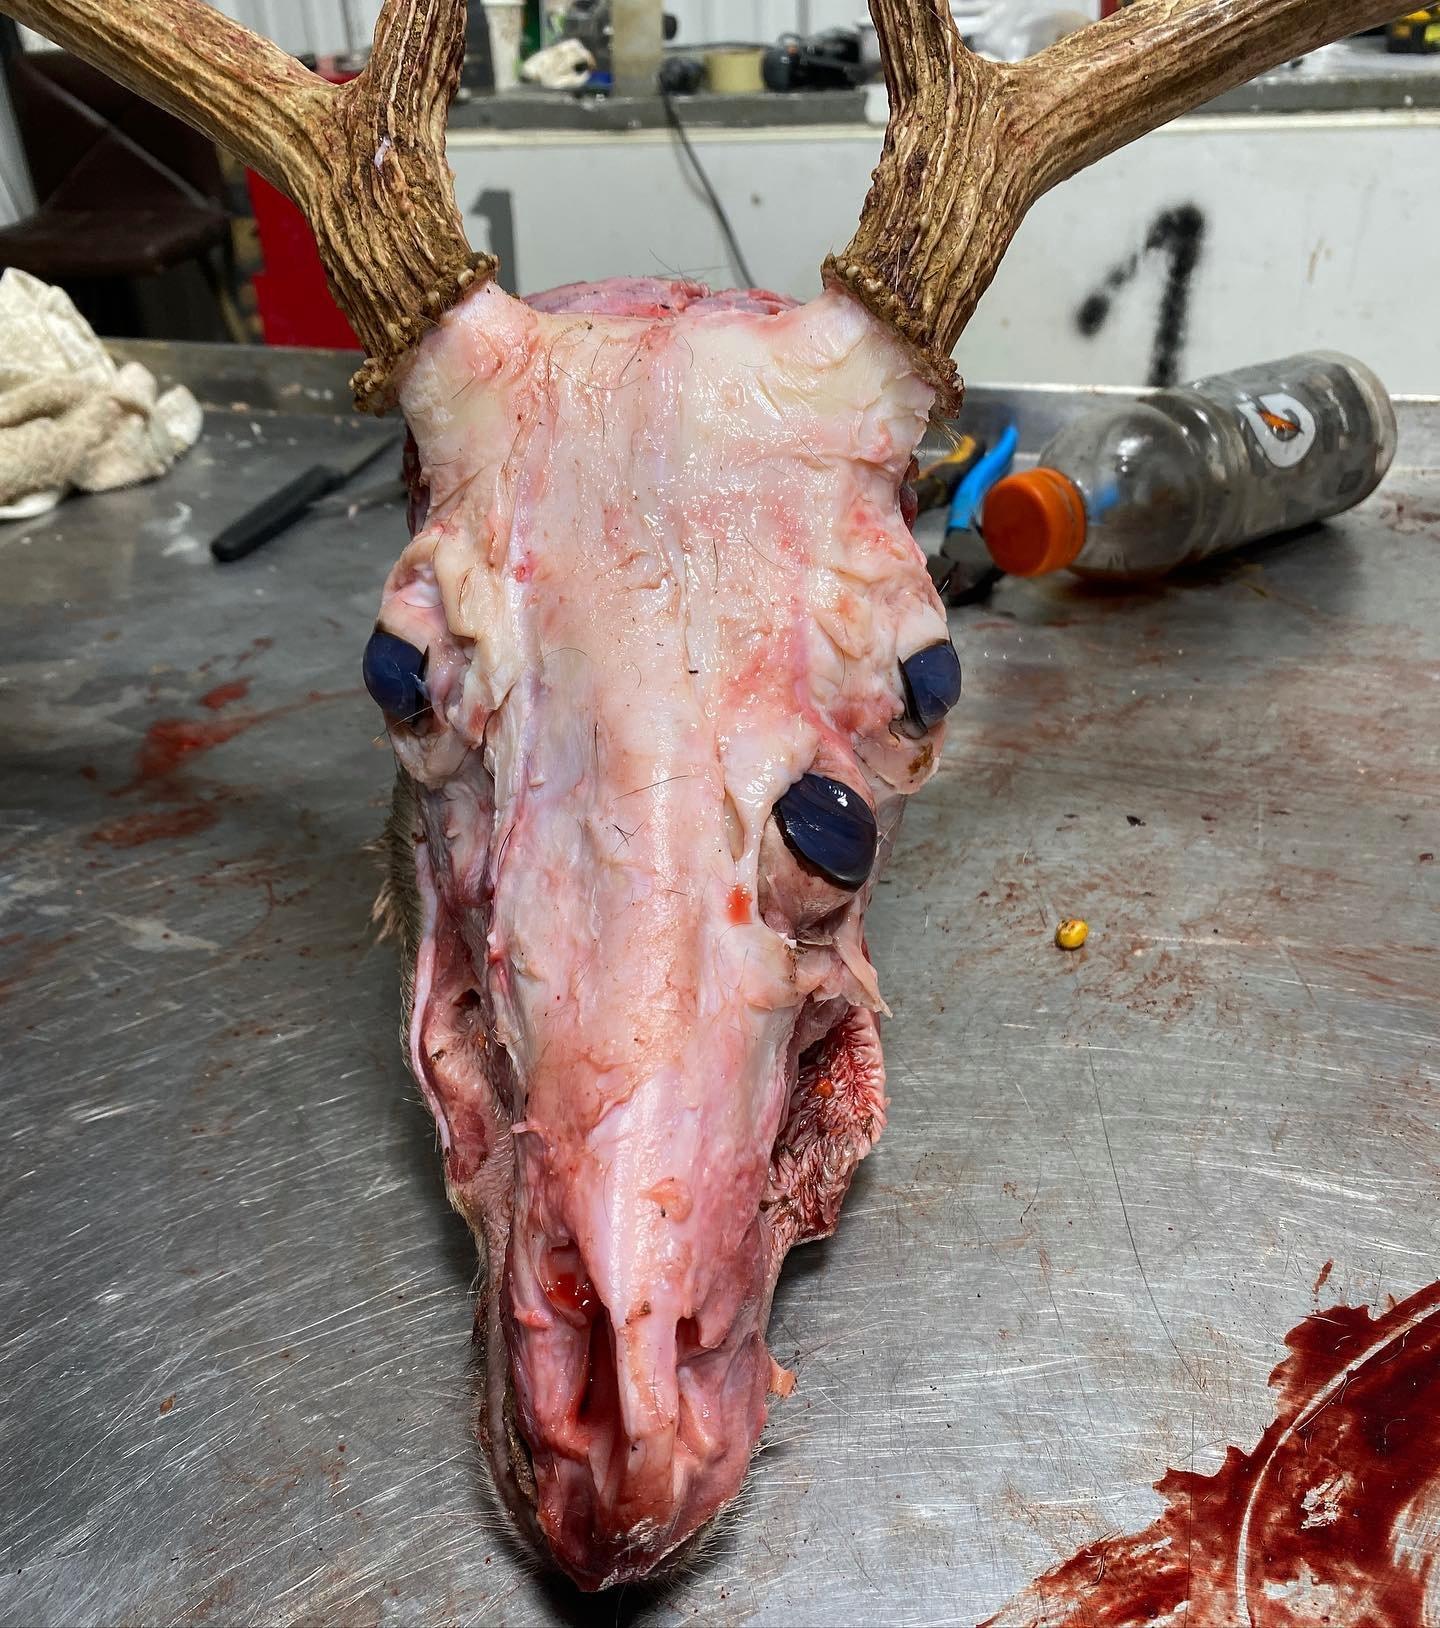 While preparing a deer for a European mount, Double Nickle Taxidermy discovered the deer had a third eye.  Image by Double Nickle Taxidermy